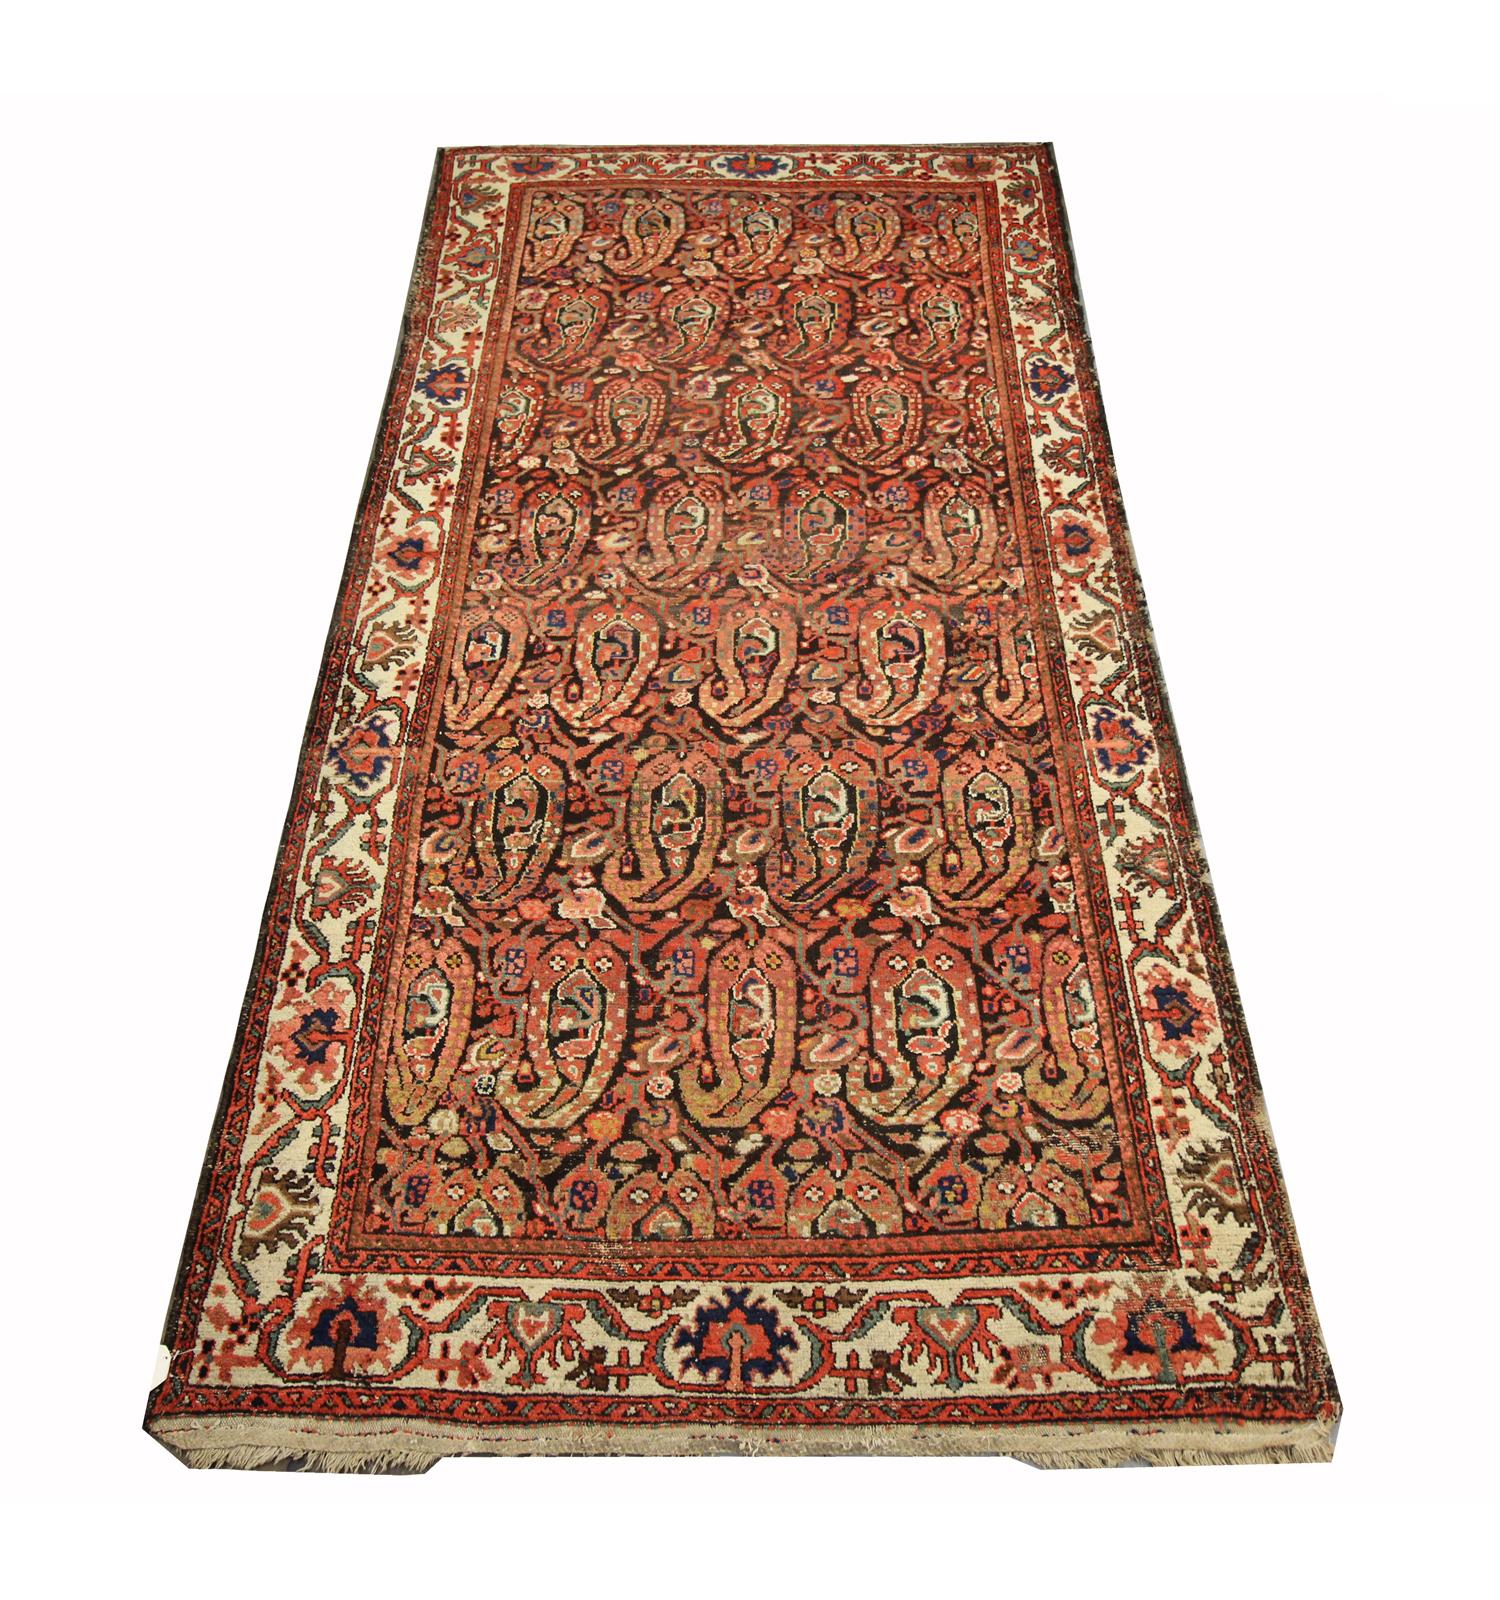 This fine wool area rug is an excellent example of antique rugs woven in Azerbaijan in the 1880s. The design features a bold paisley print woven in rich red, beige, blue and orange on a contrasting background. The shapes and patterns in this piece